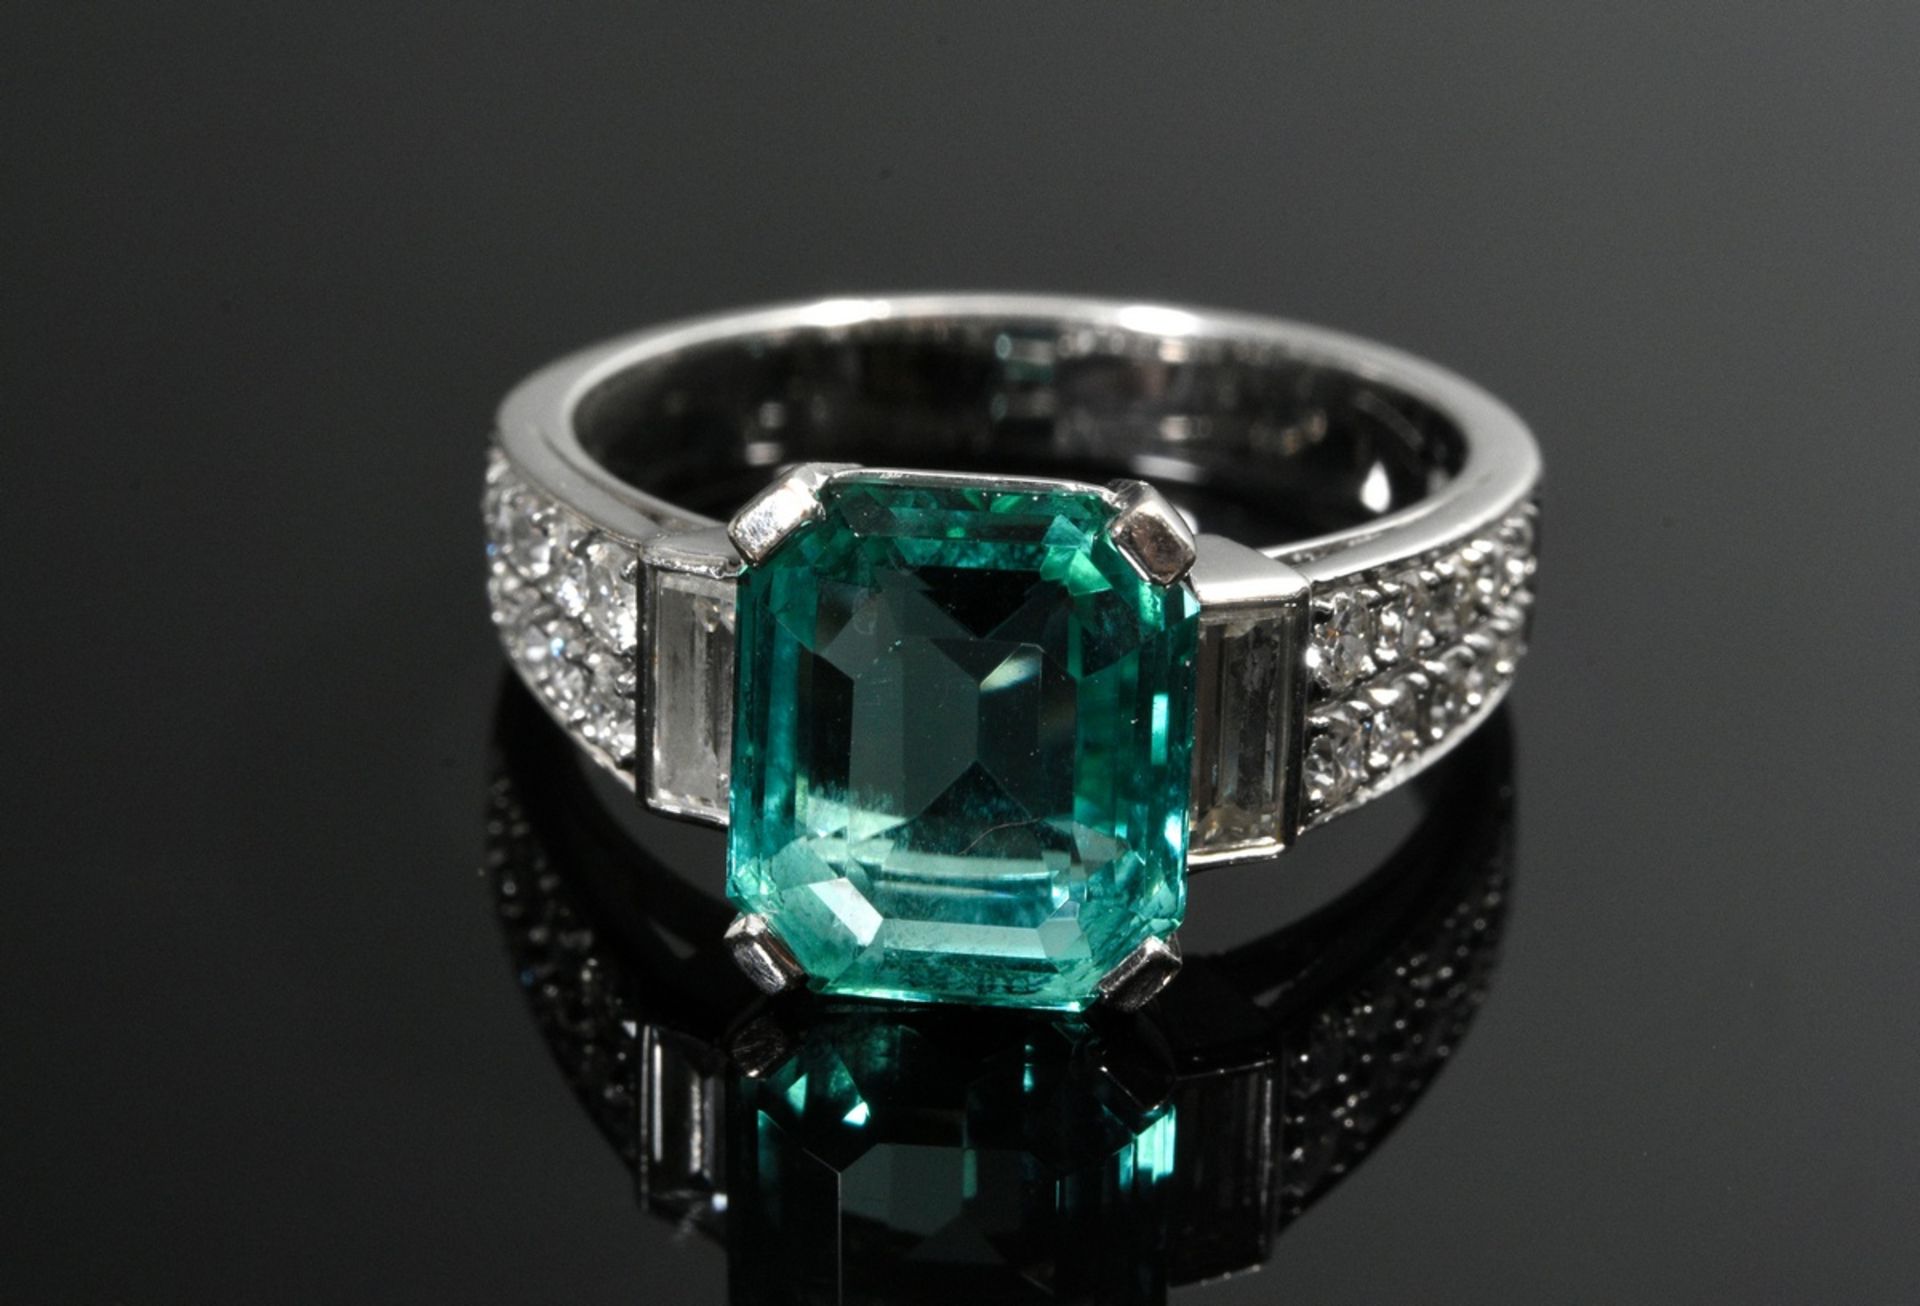 White gold 750 ring with emerald-cut tourmaline (approx. 2.70ct) and brilliant- and baguette-cut di - Image 3 of 4